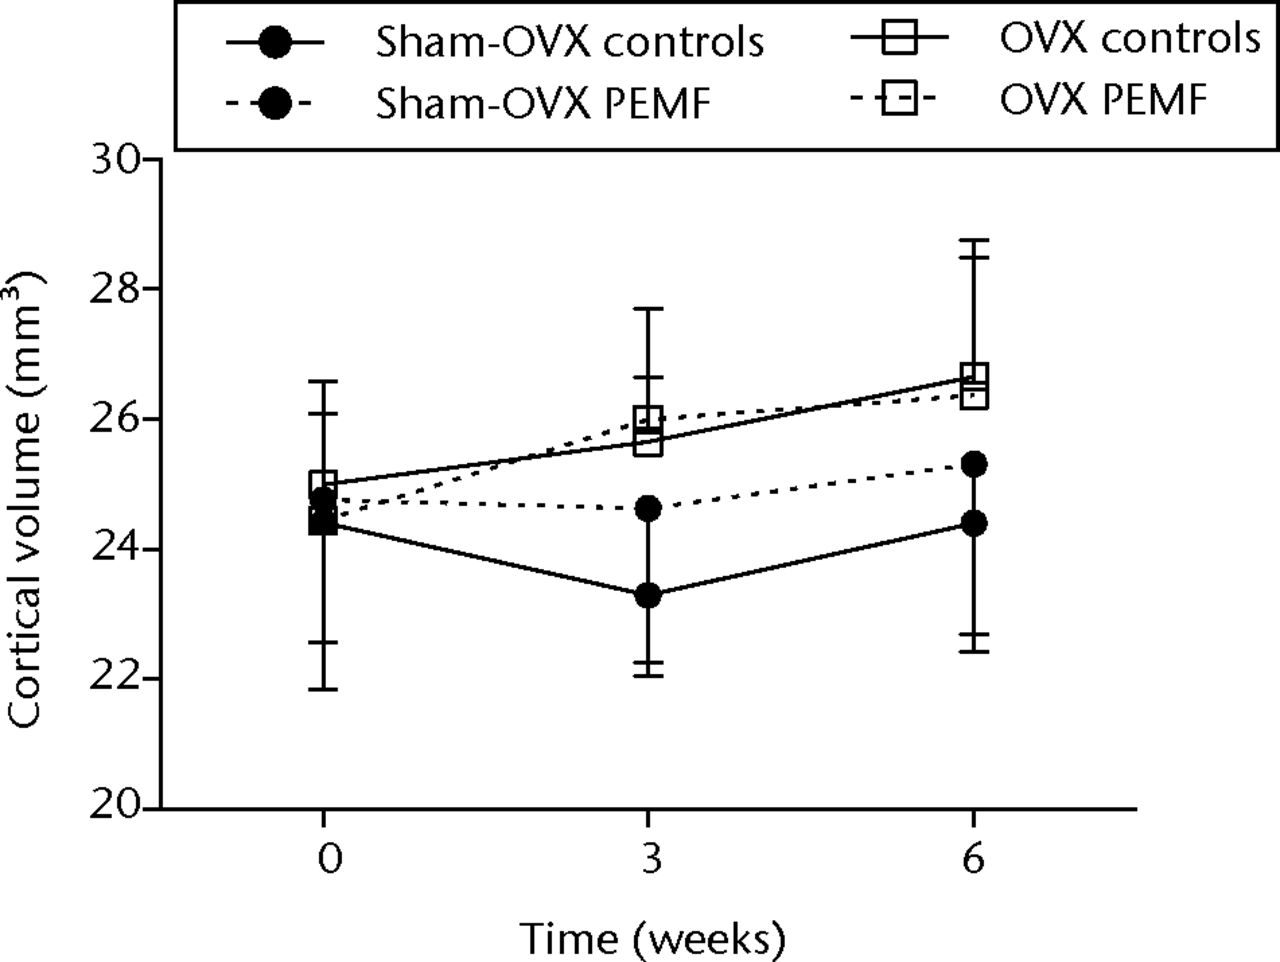 Figs. 2a - 2c 
          Graphs showing a) trabecular
volume fractions, b) cortical volume and c) mineralised callus volume
of electromagnetic field-treated and non-treated control tibias
in sham-ovariectomised (n = 7) and in ovariectomised (n = 8) rats.
Data are presented as mean values and standard deviations.
        